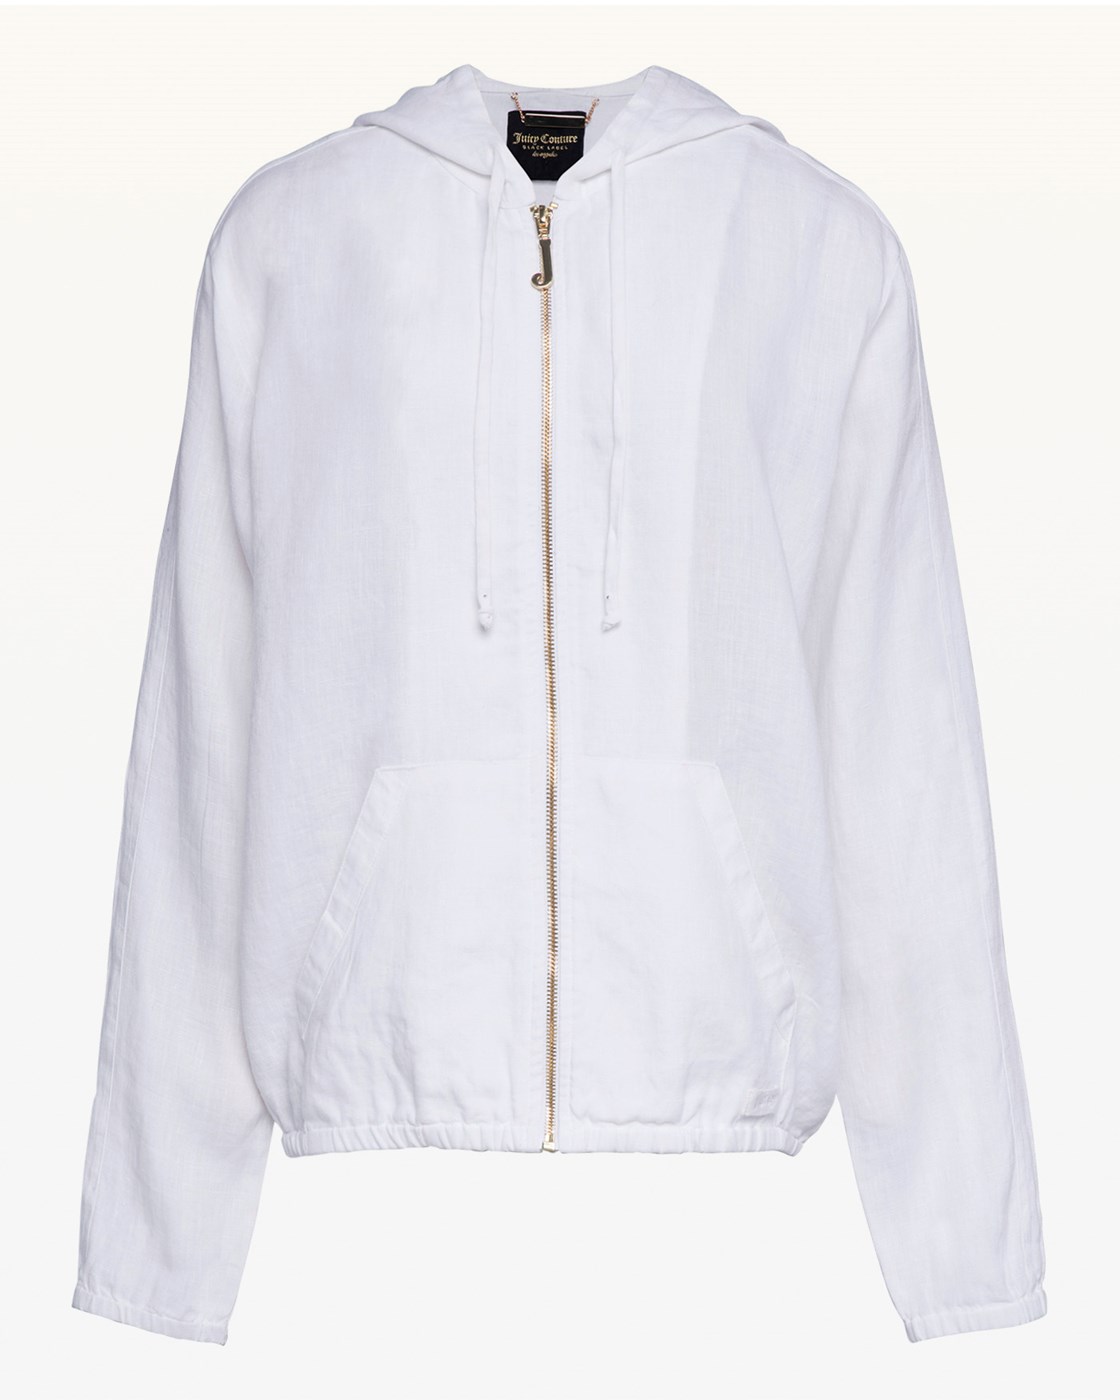 Juicy Couture Washed Linen Hooded Jacket